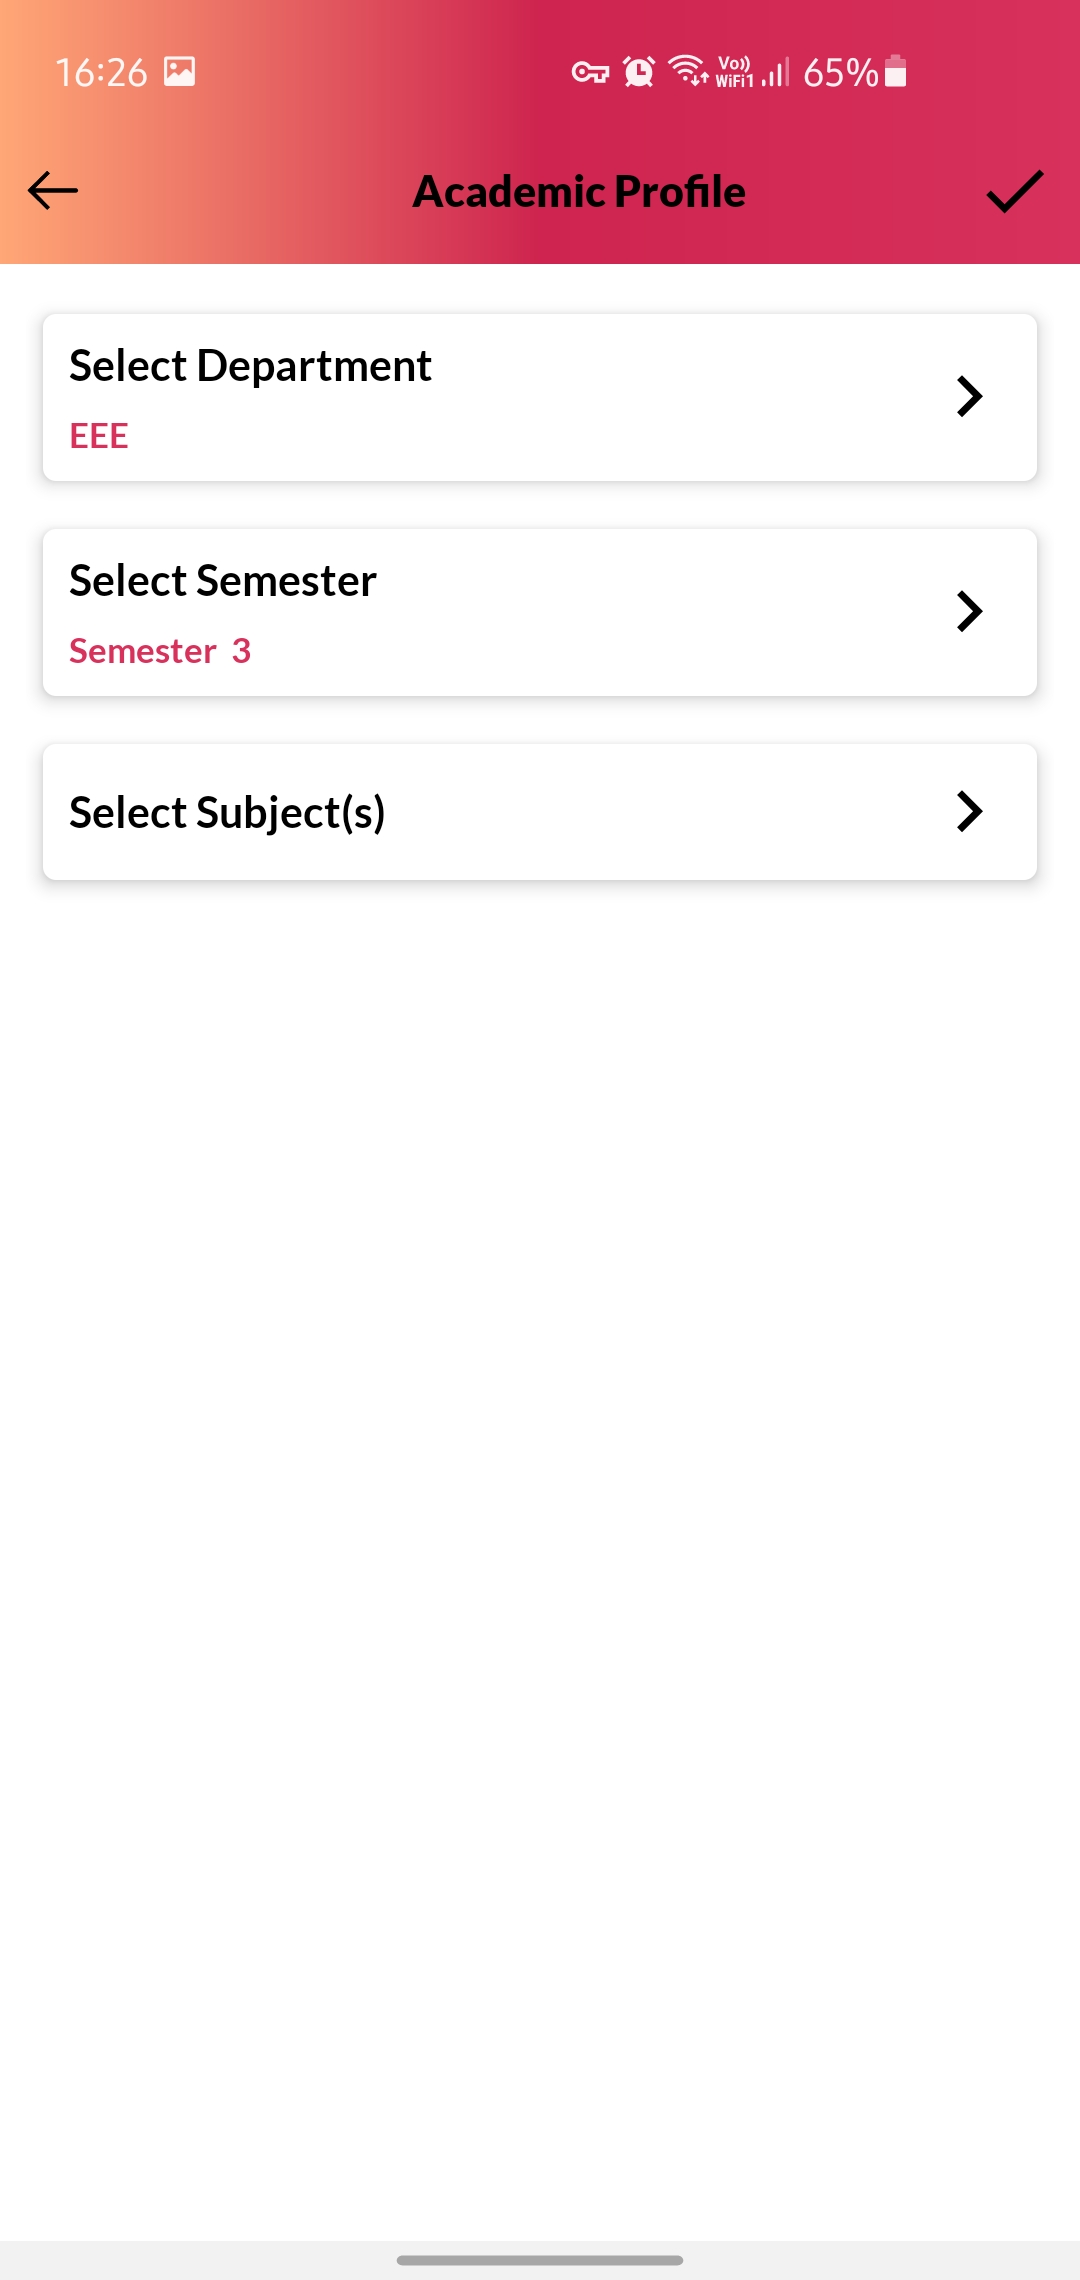 3. Please select the Department and Semester of Courses you want to teach.